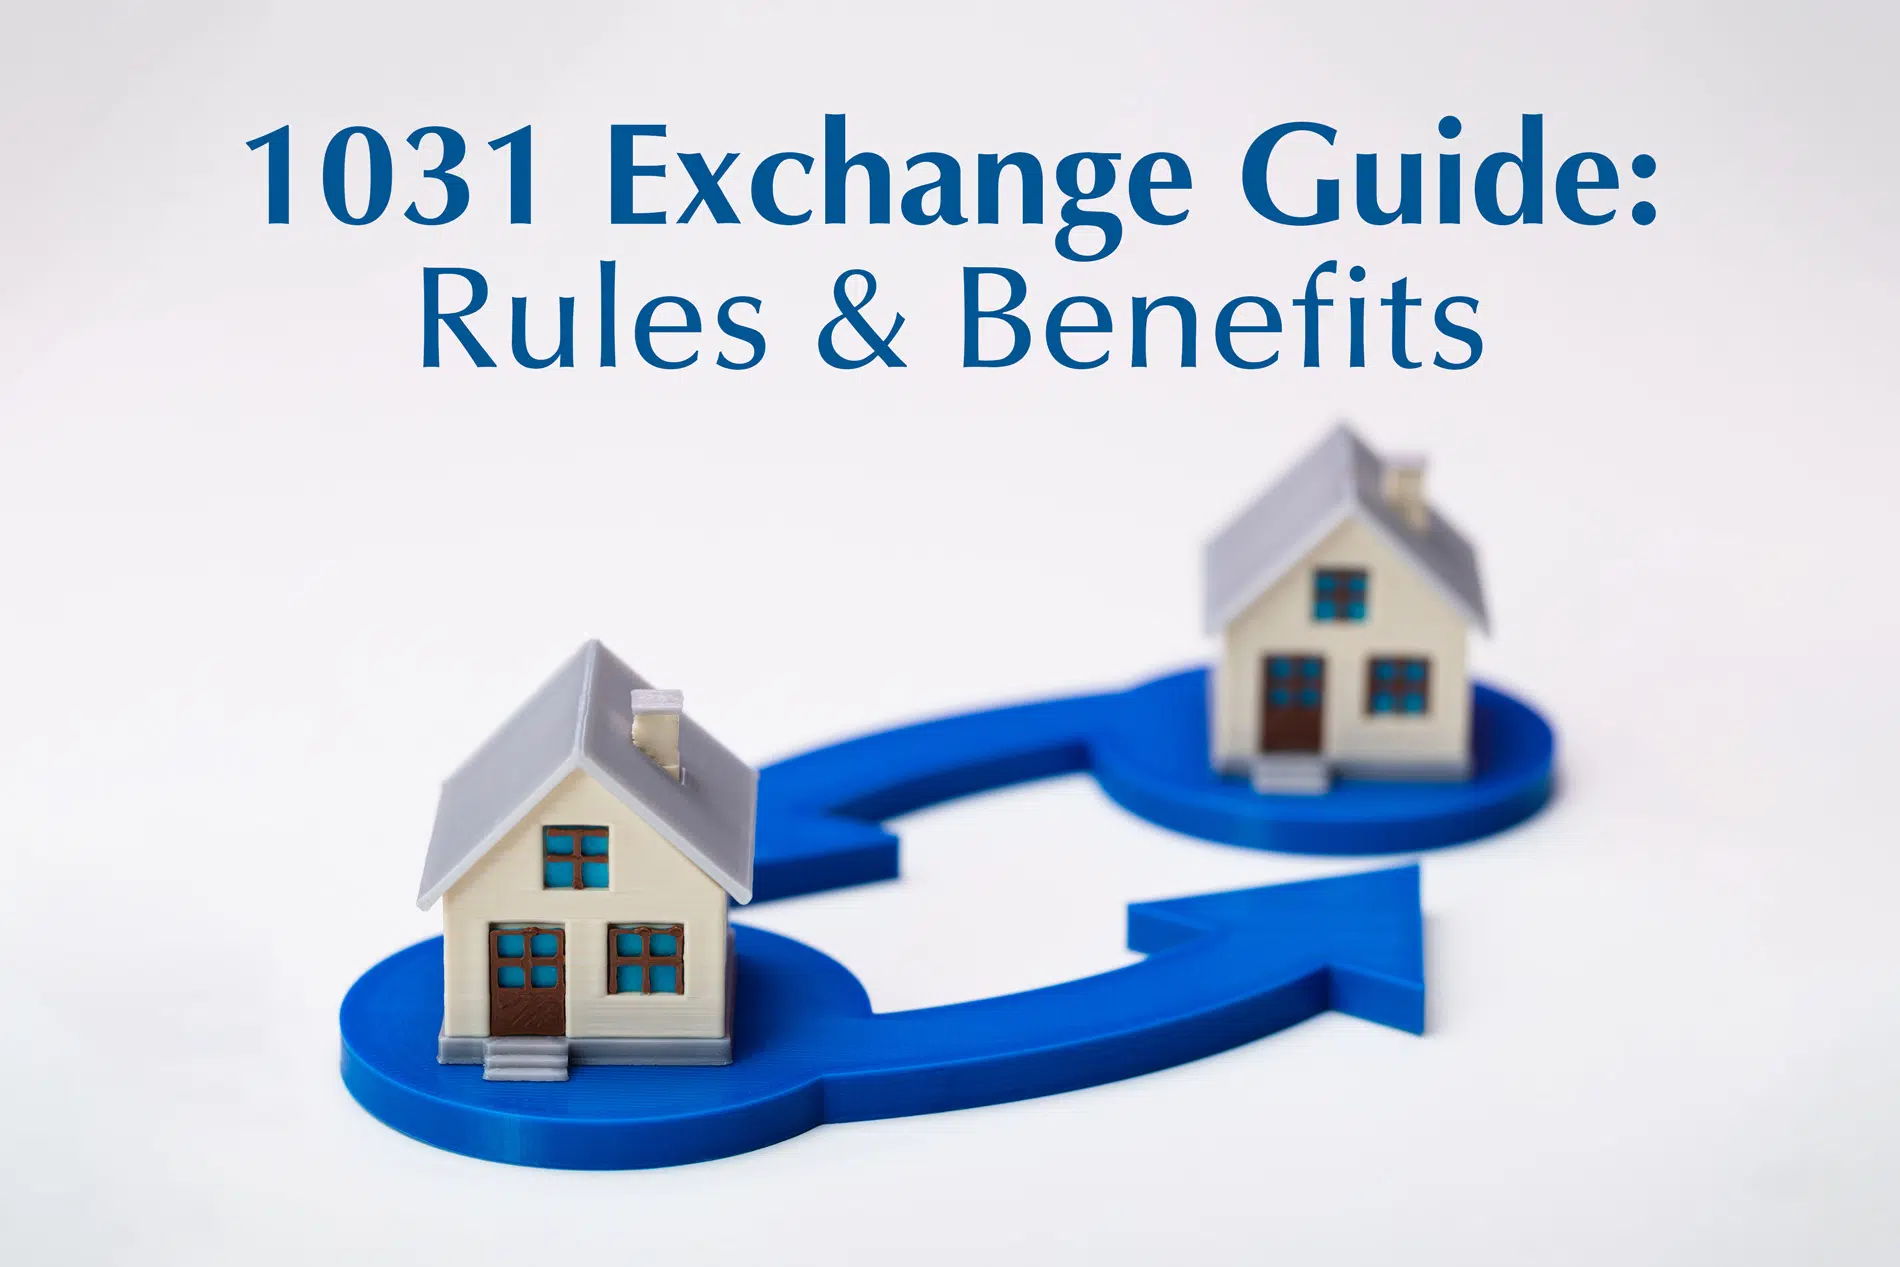 Featured image for “1031 Exchange Guide: Rules & Benefits”